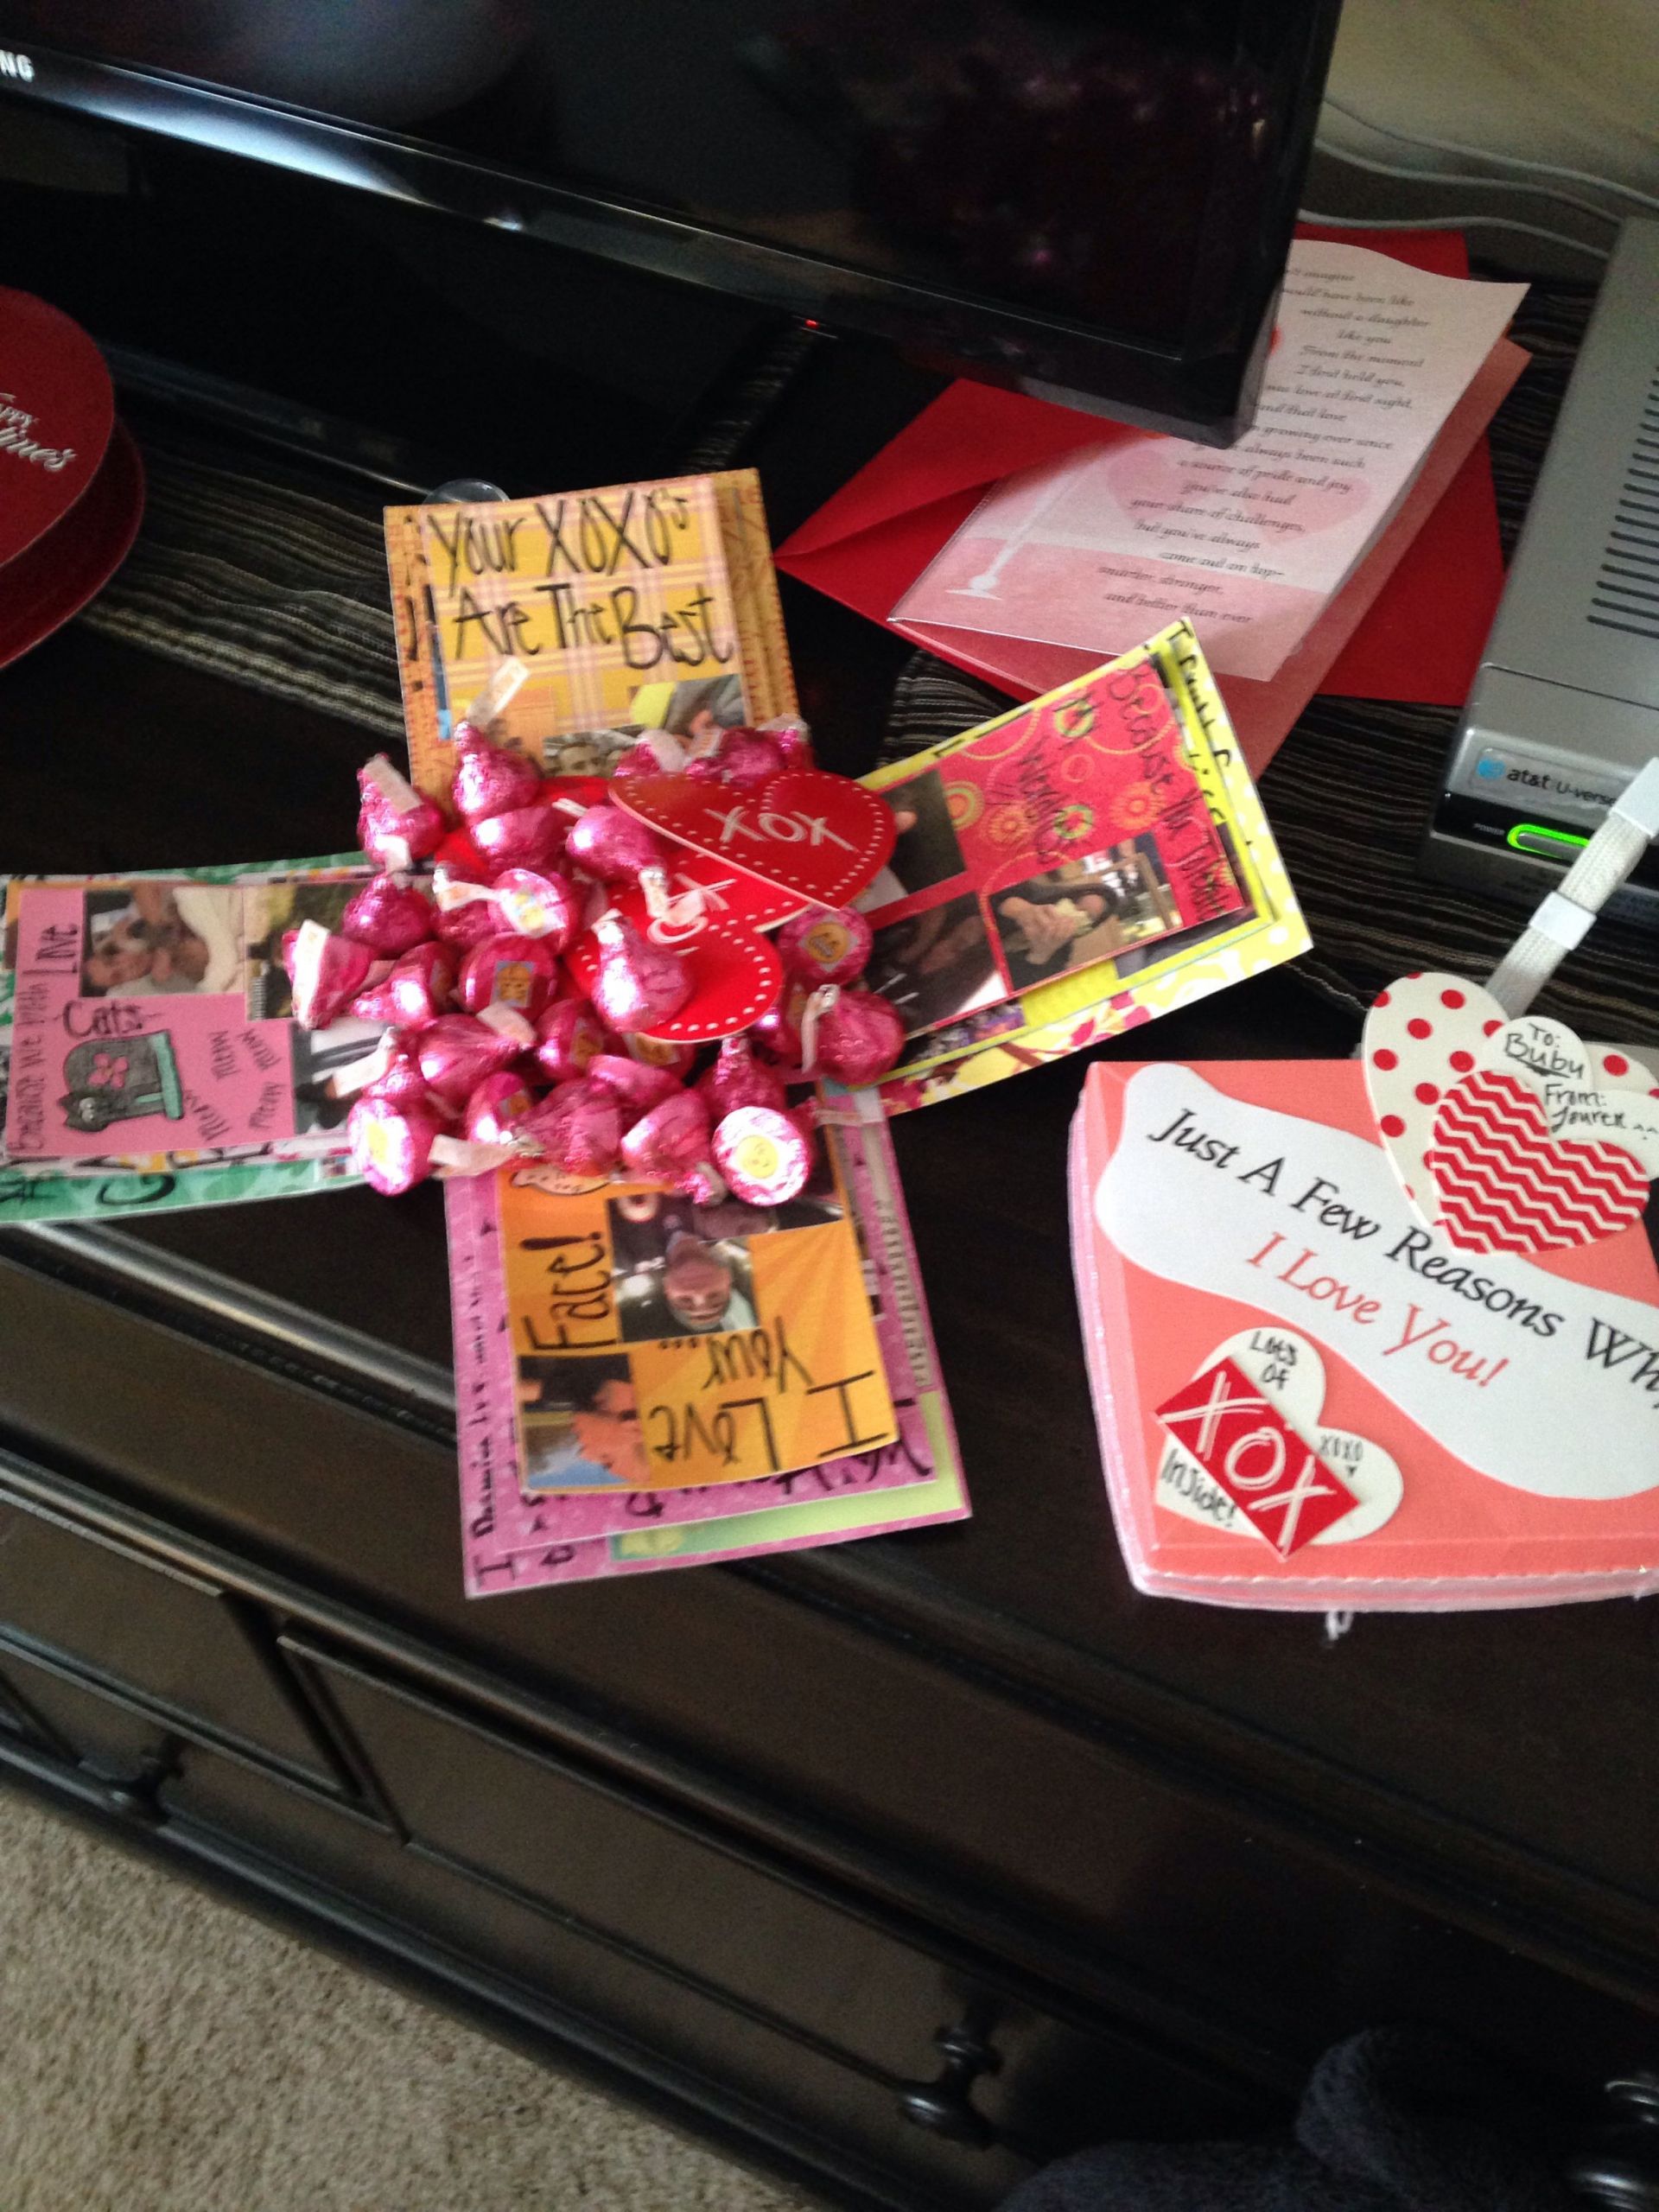 Cute Valentine Gift Ideas For Him
 My exploding box I made for my boyfriend on valentines day